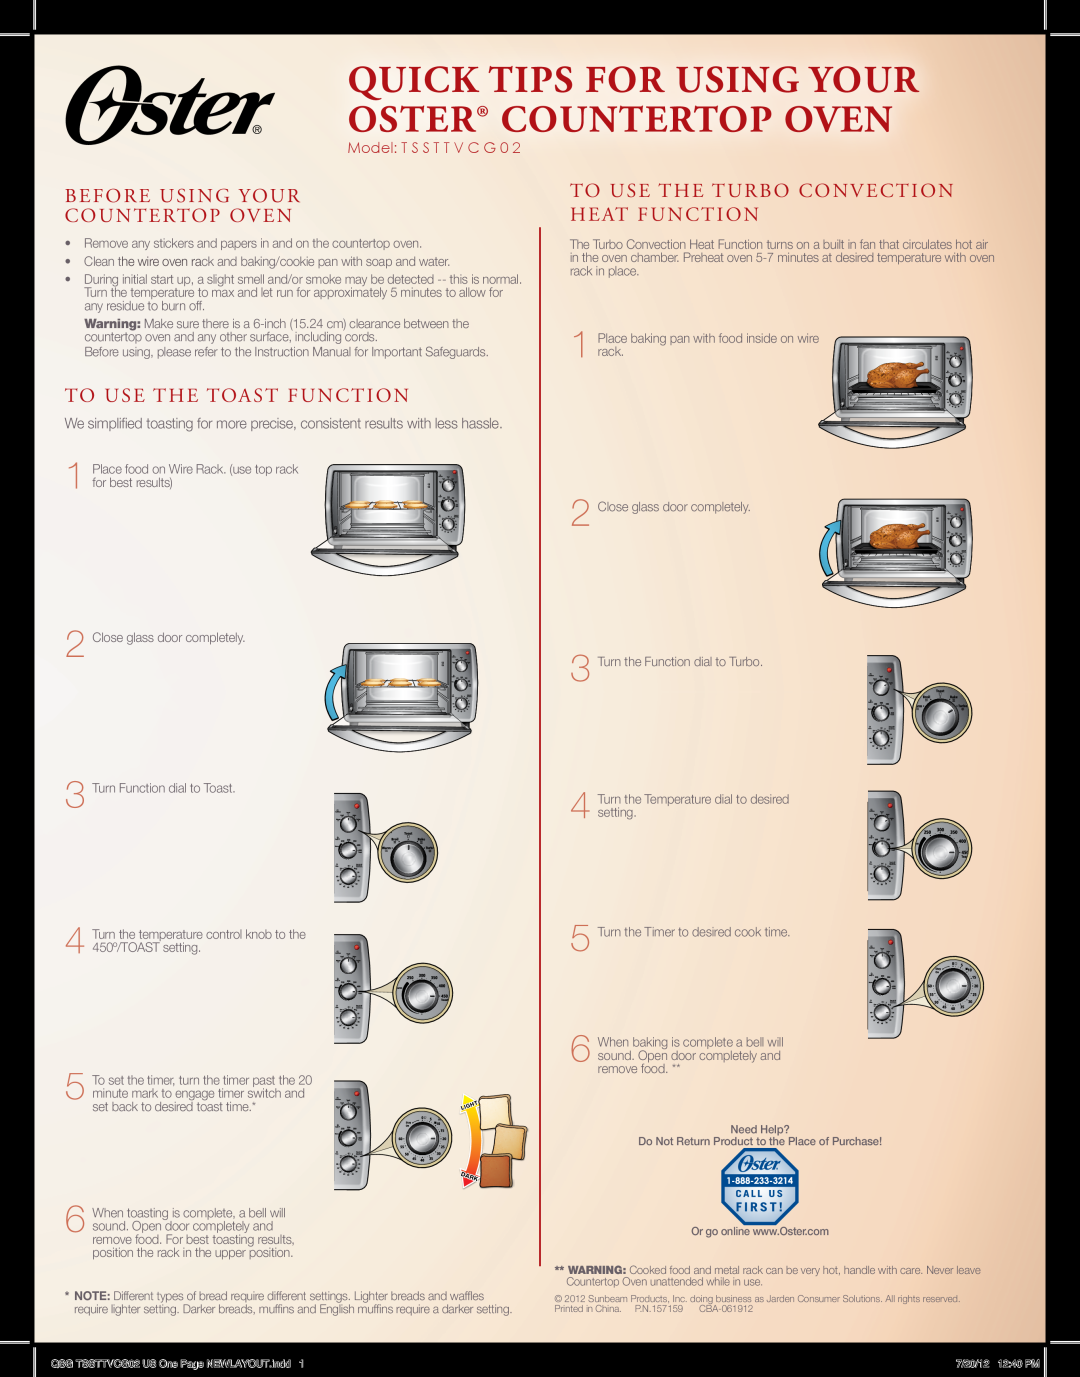 Oster instruction manual Quick Tips For Using Your Oster Countertop Oven, Before Using Your Countertop Oven 